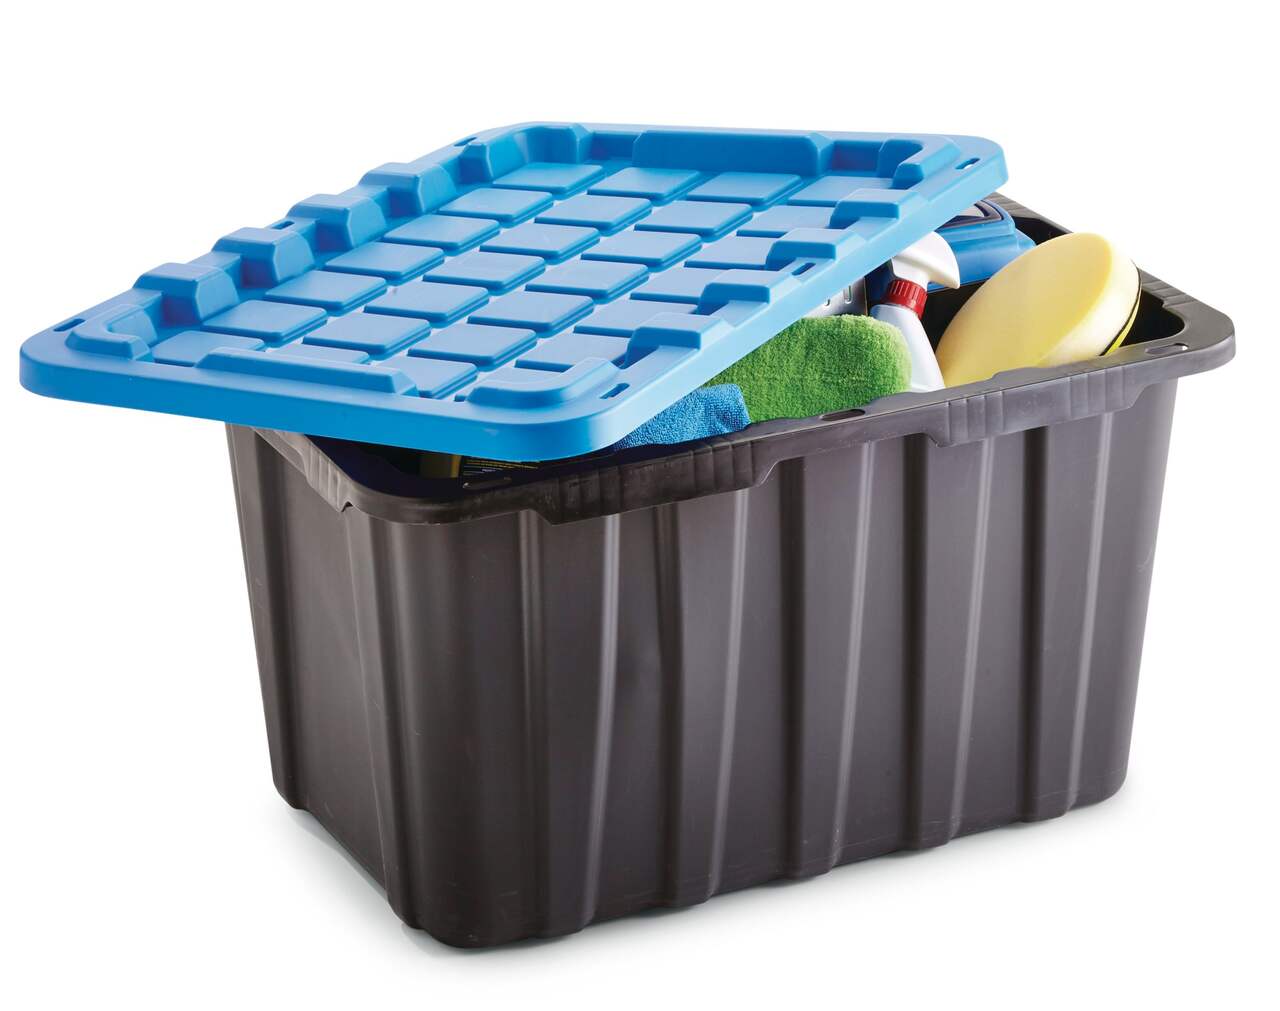 https://media-www.canadiantire.ca/product/living/home-organization/storage-containers/1426045/mastercraft-102l-storage-box-0eae0964-a40c-4658-83f3-c350a298936a-jpgrendition.jpg?imdensity=1&imwidth=1244&impolicy=mZoom